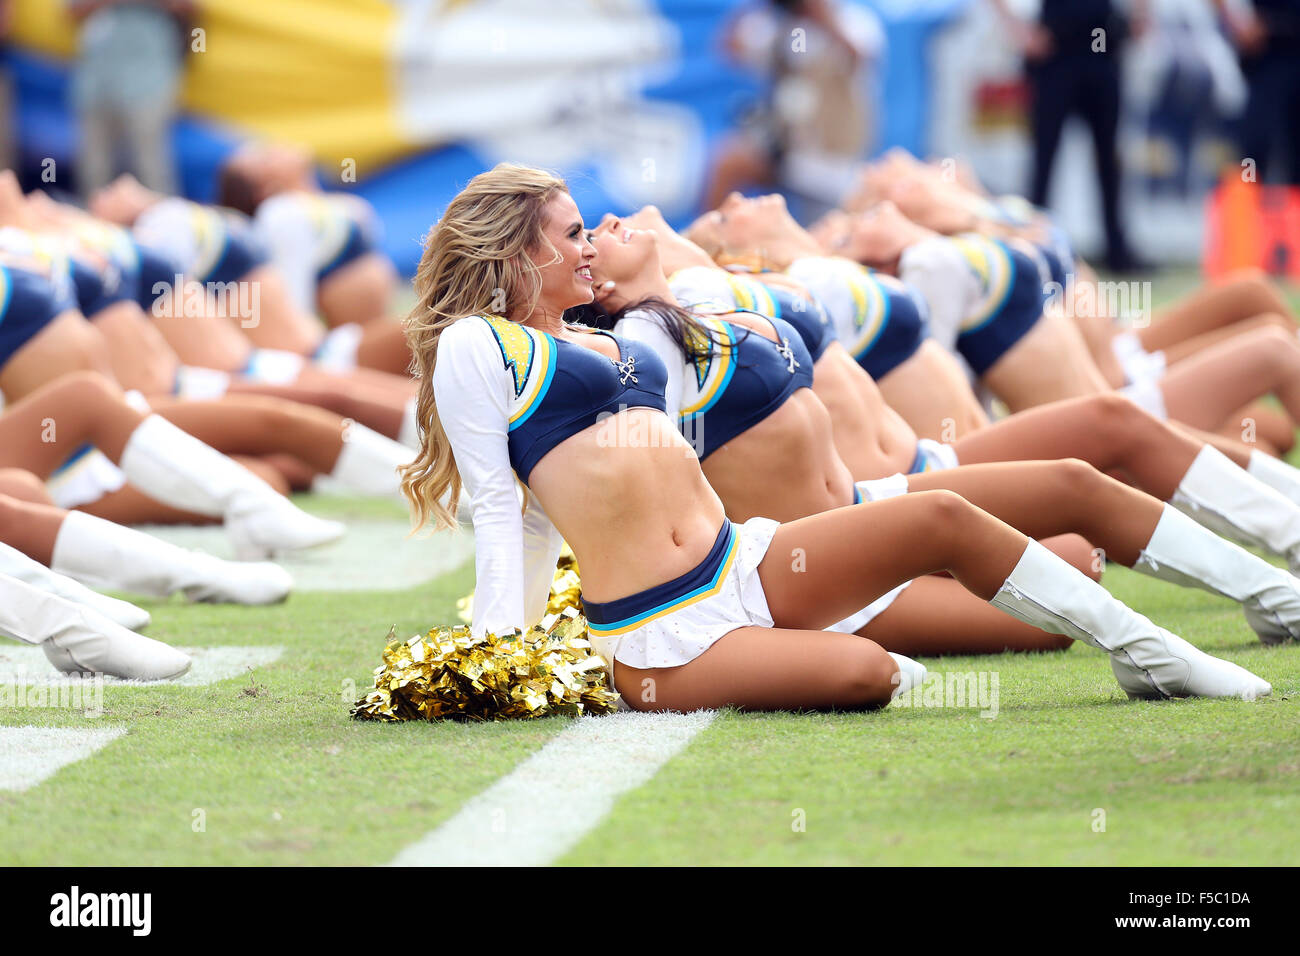 October 25, 2015 San Diego Chargers cheerleaders in action during the NFL Football game between the Oakland Raiders and the San Diego Chargers at the Qualcomm Stadium in San Diego, California.Charles Baus/CSM Stock Photo